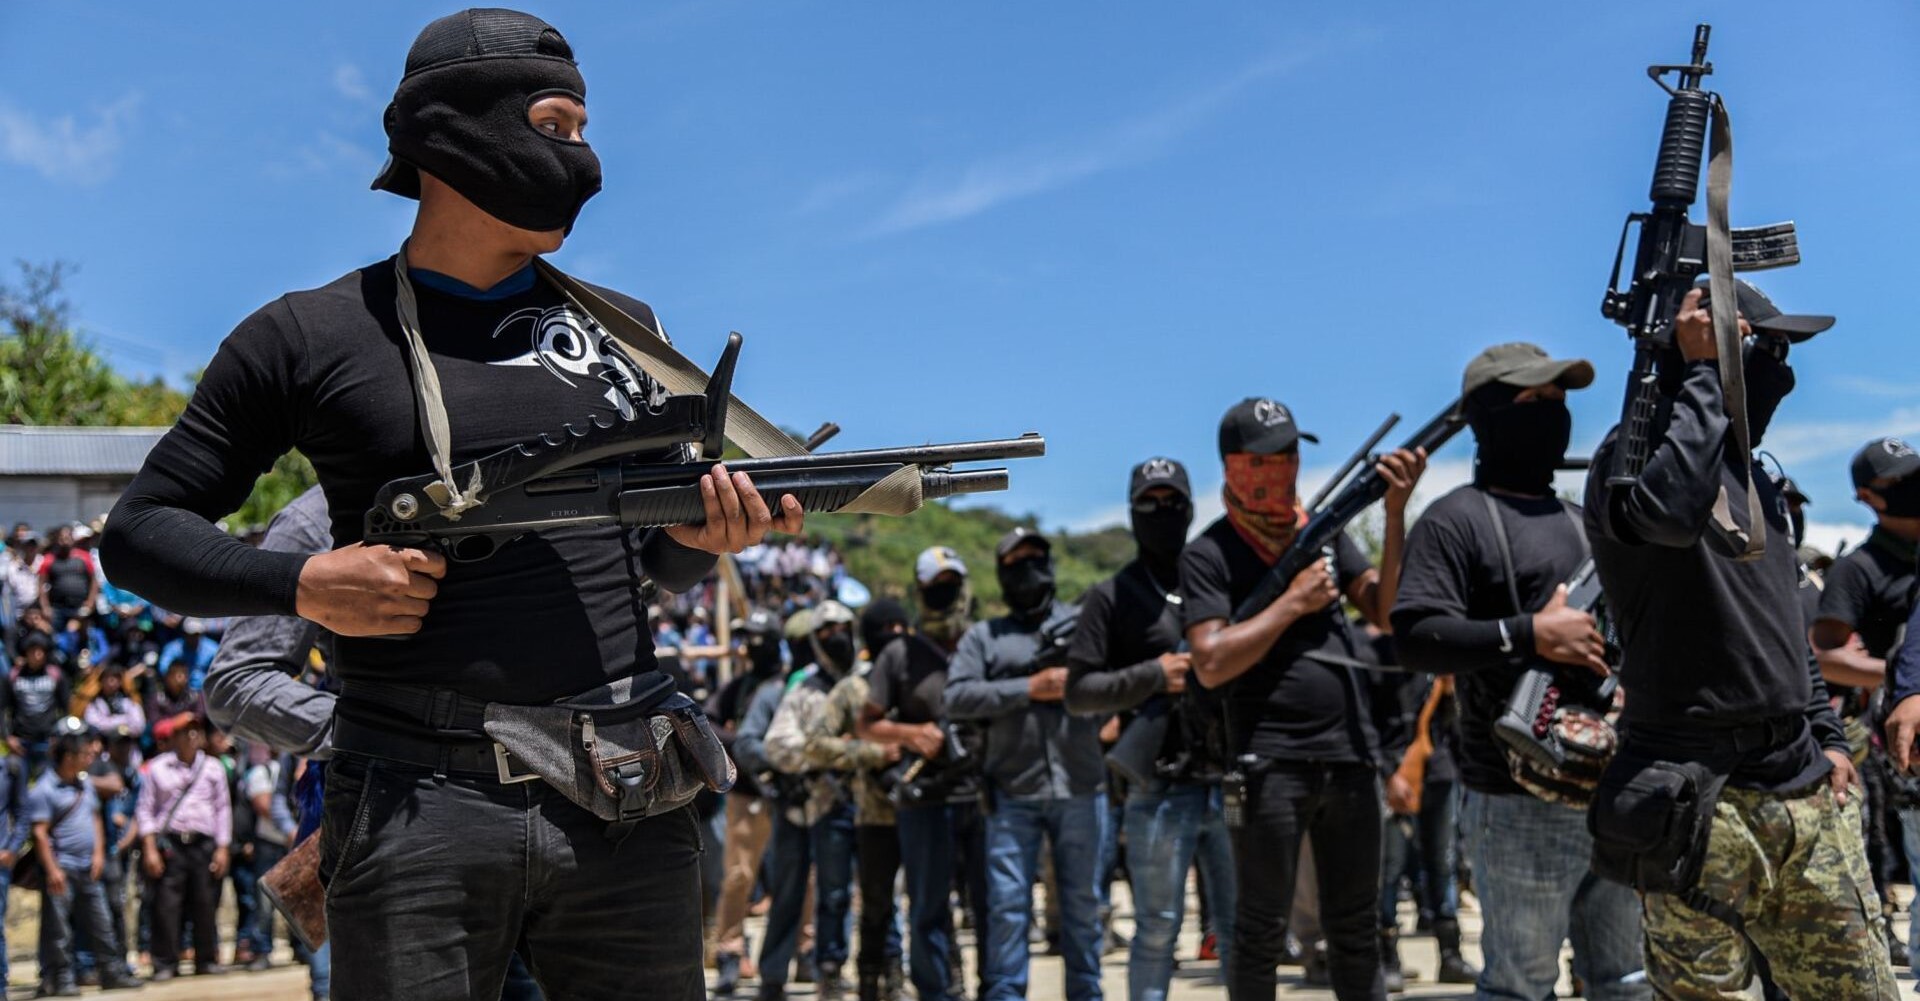 Mexico's War on Drugs as a Policy of Social Reorganization